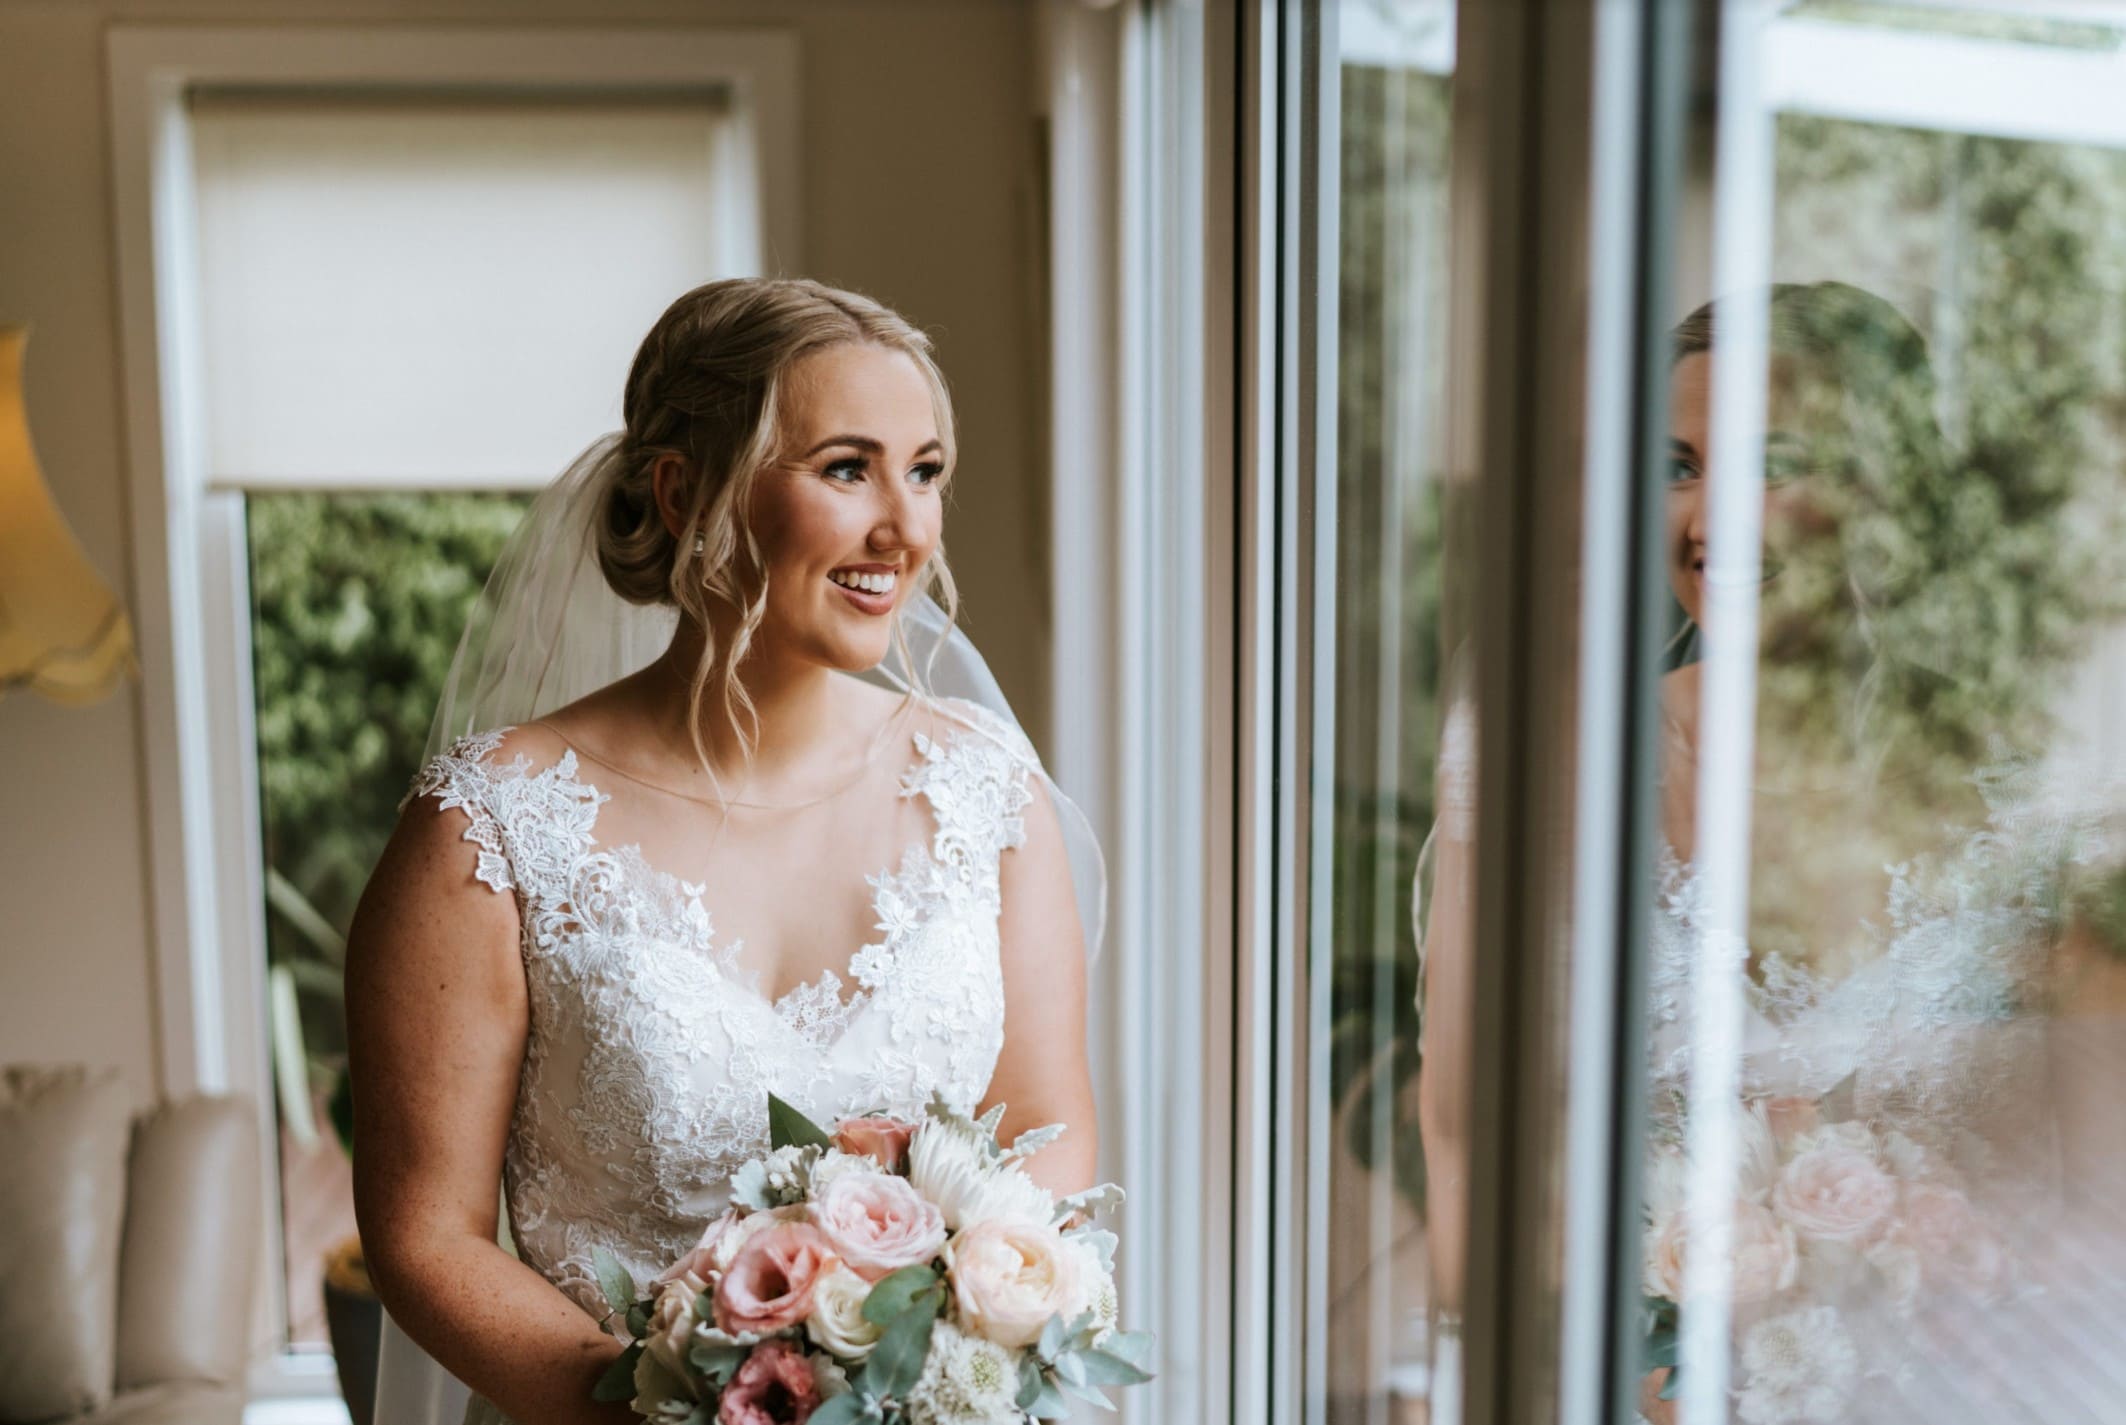 Makeup by Elly Liana Wedding Hair Melbourne